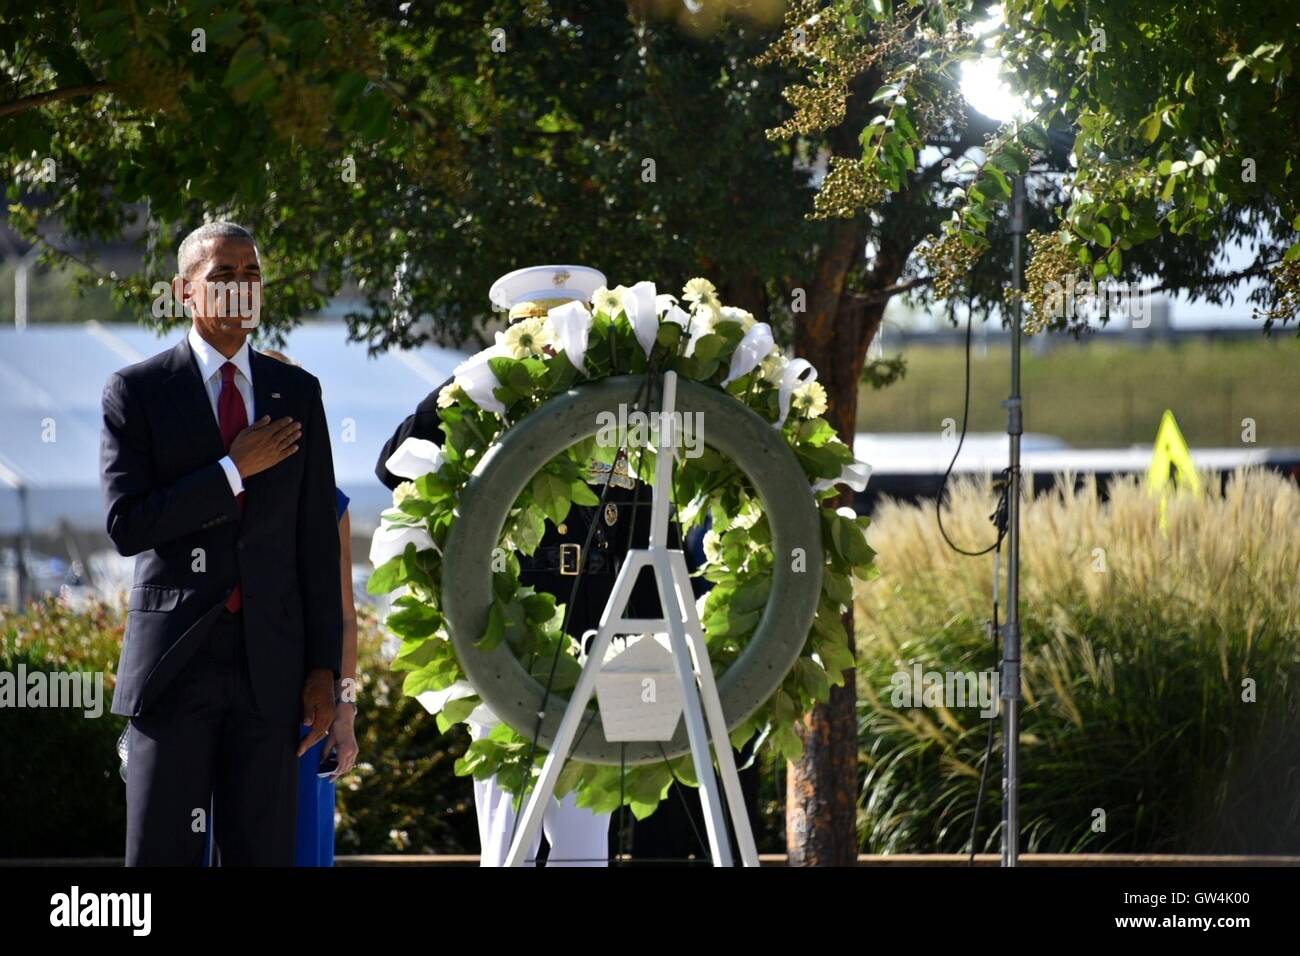 Arlington, Virginia, USA. 11th September, 2016. U.S President Barack Obama salutes after placing a wreath at the memorial during a ceremony commemorating the 15th anniversary of the 9/11 terrorist attacks at the Pentagon September 11, 2016 in Arlington, Virginia. Credit:  Planetpix/Alamy Live News Stock Photo